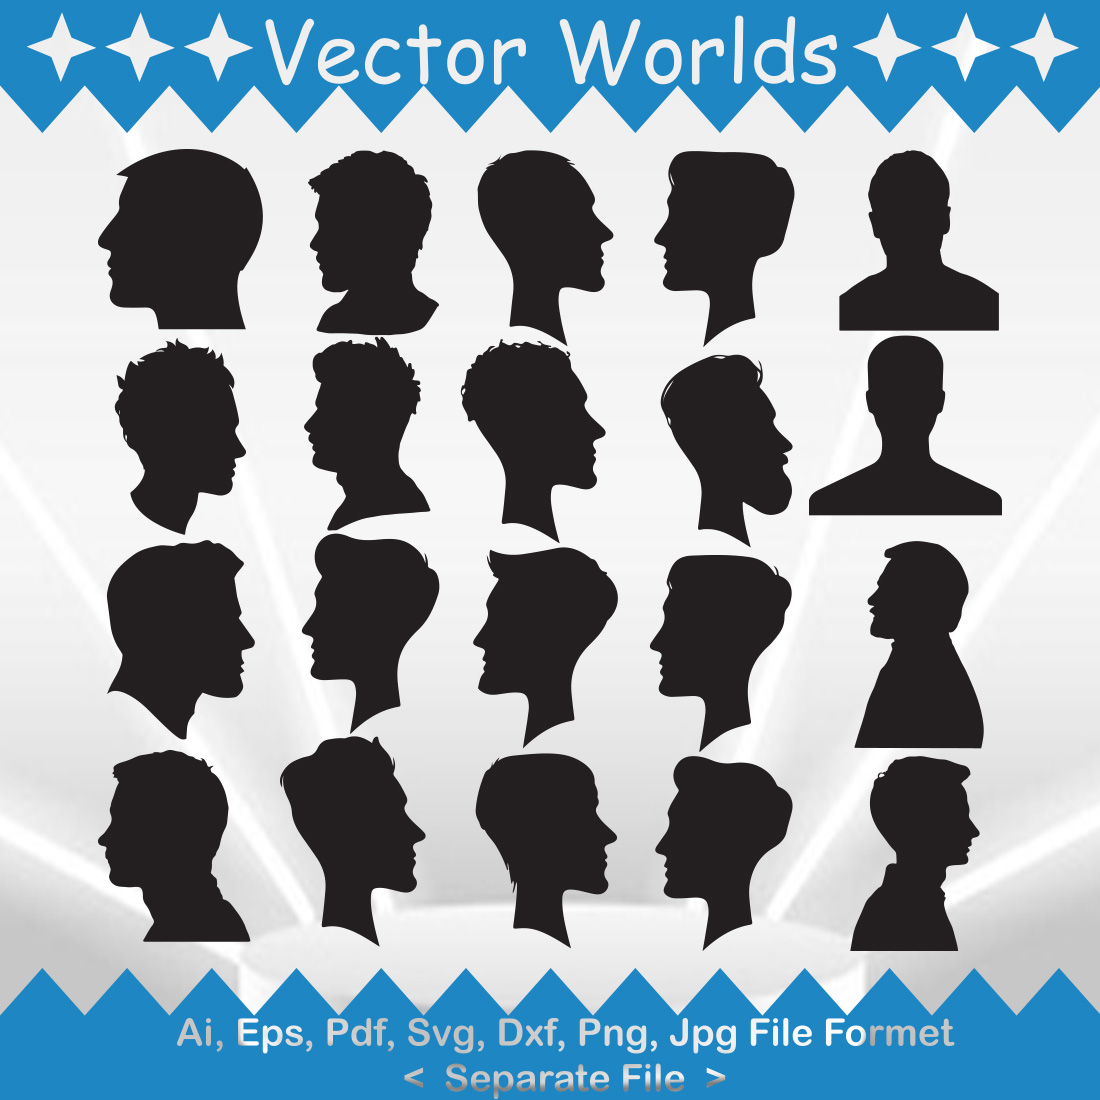 Man Heads SVG Vector Design cover image.